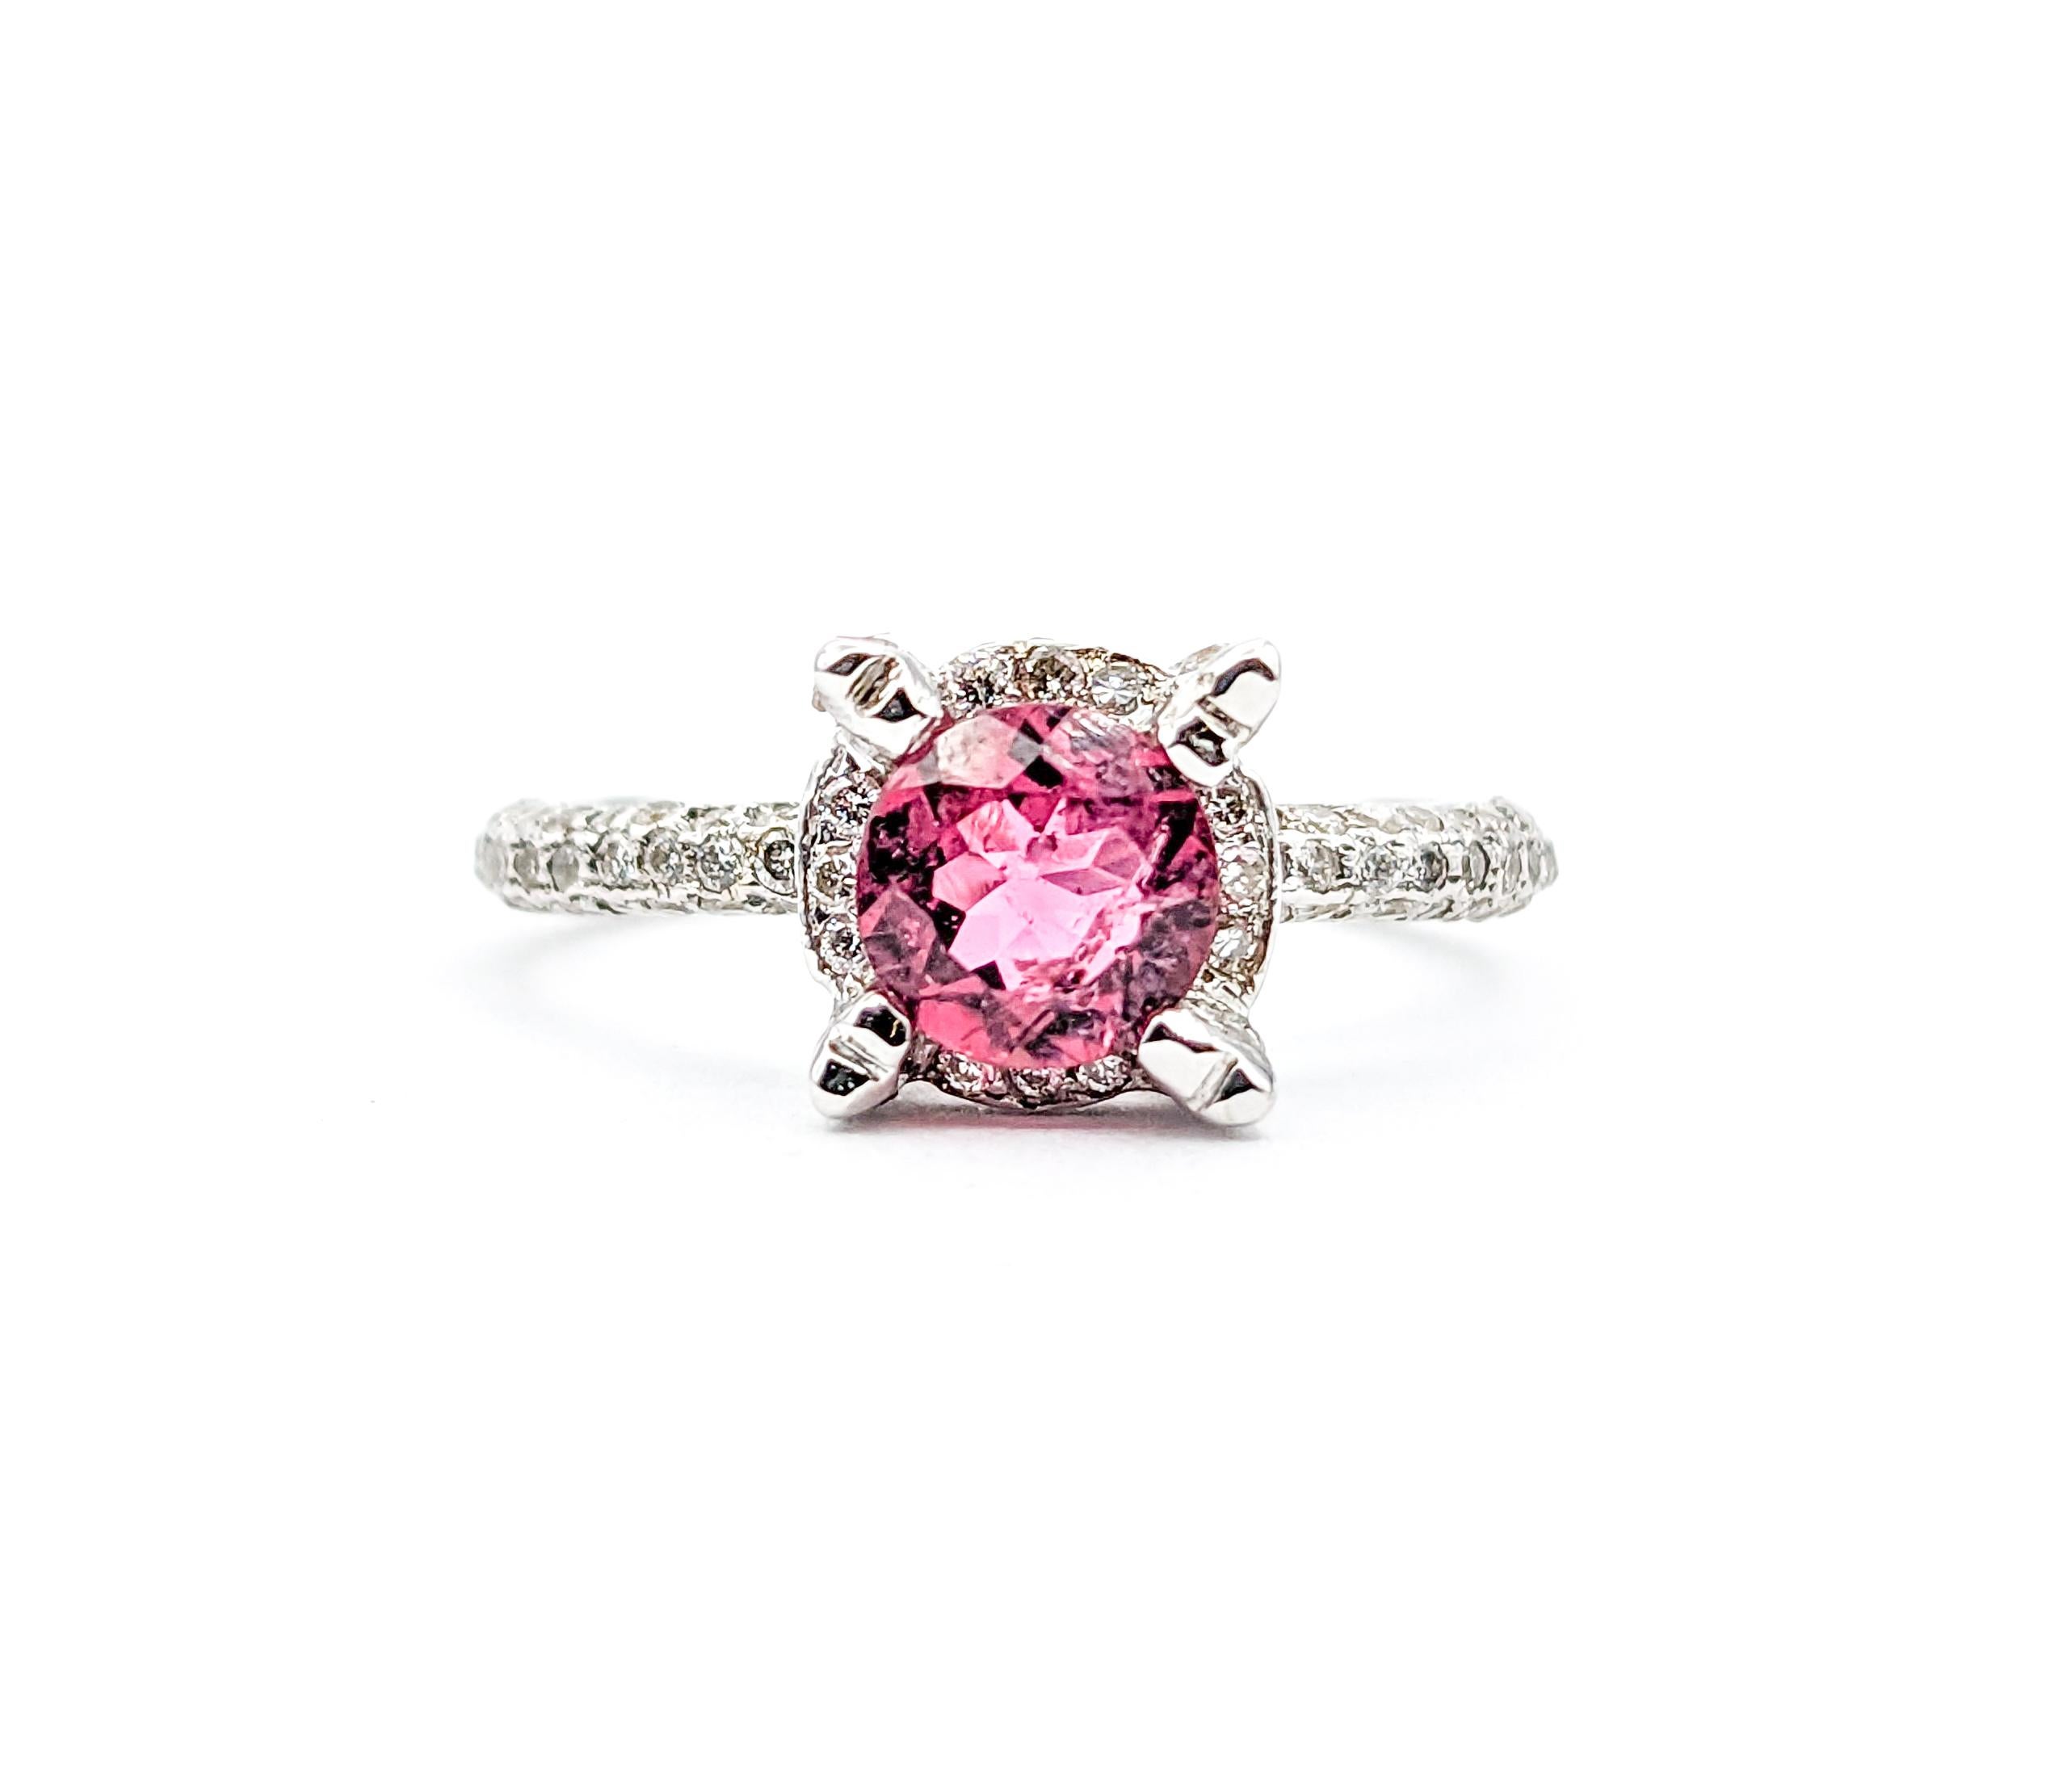 .78ct Pink Tourmaline & .75ctw Diamonds Ring In White Gold

Introducing this fun pink Tourmaline Ring, elegantly crafted in 14k white gold, featuring .75ctw of shimmering Diamonds with SI2-I1 clarity. At the heart of this stunning piece lies a .78ct